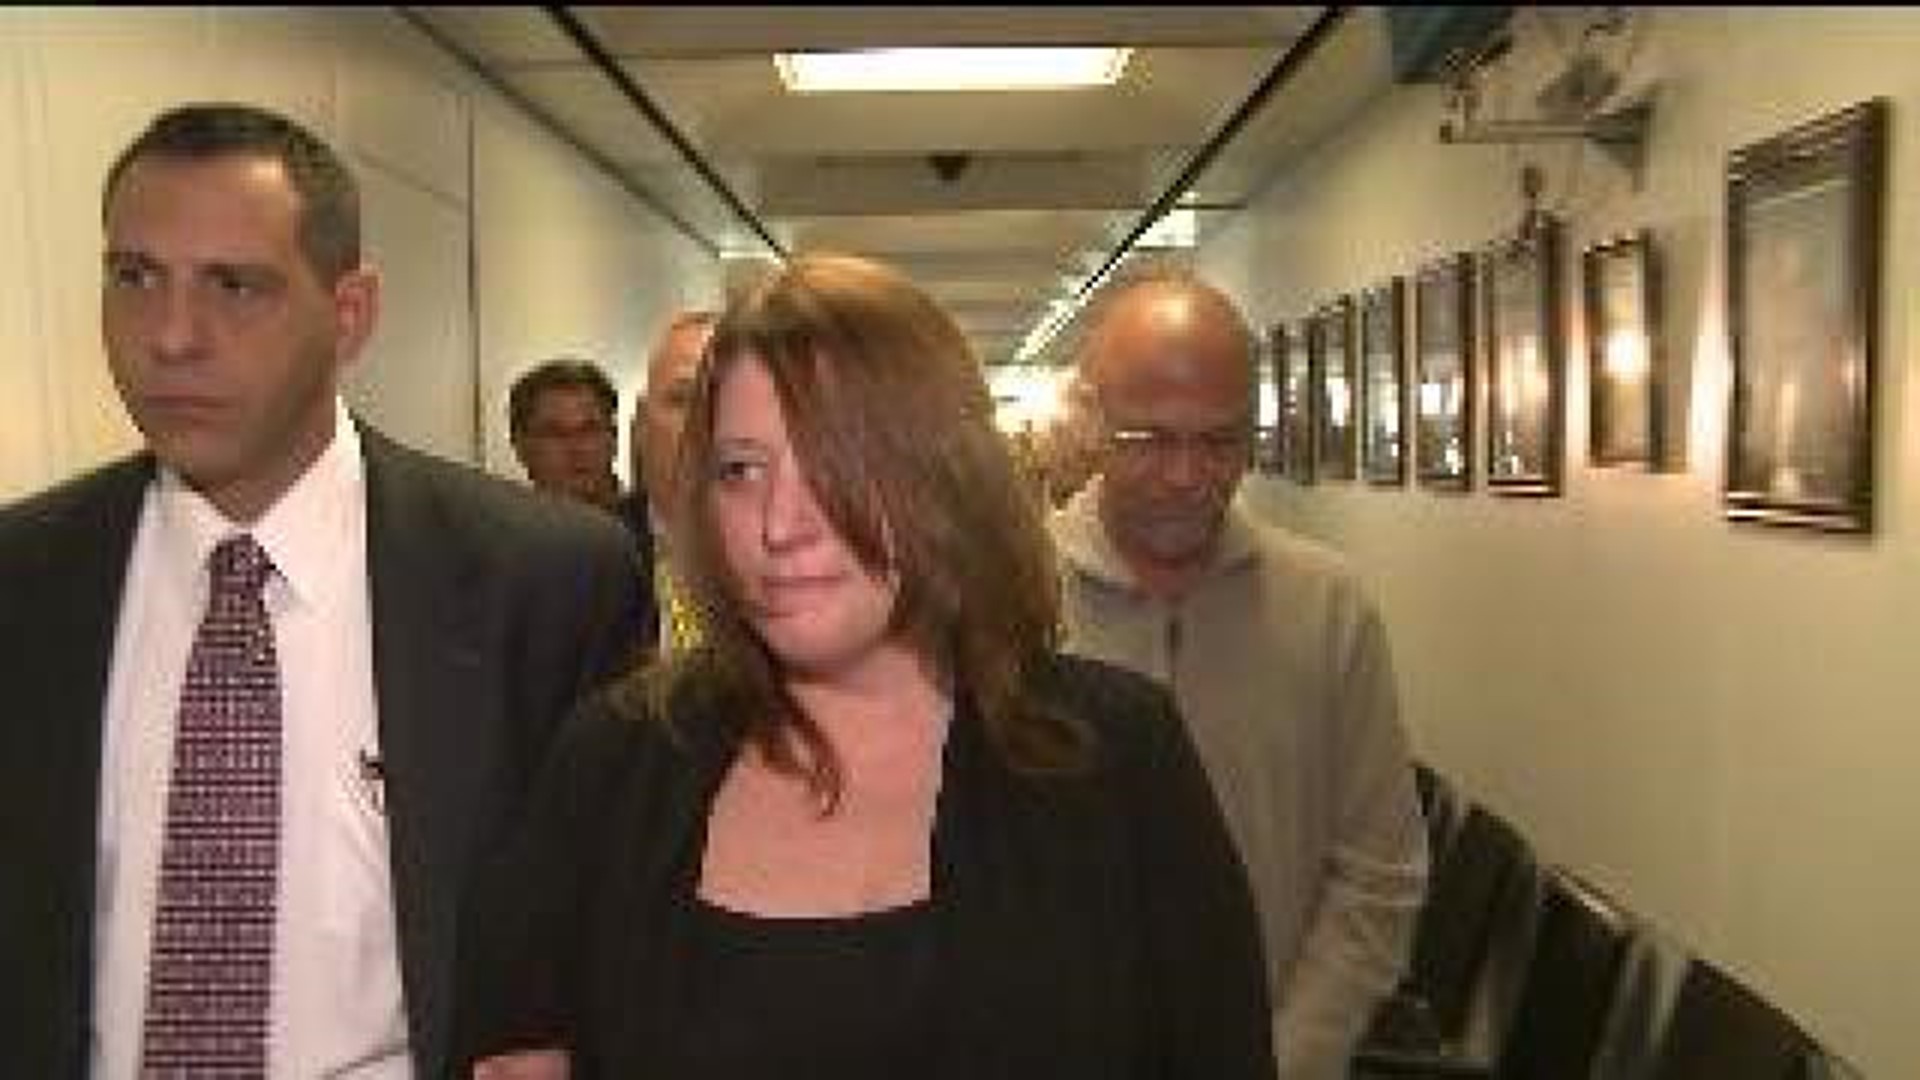 Parents Face Involuntary Manslaughter Charges in Baby Death Case